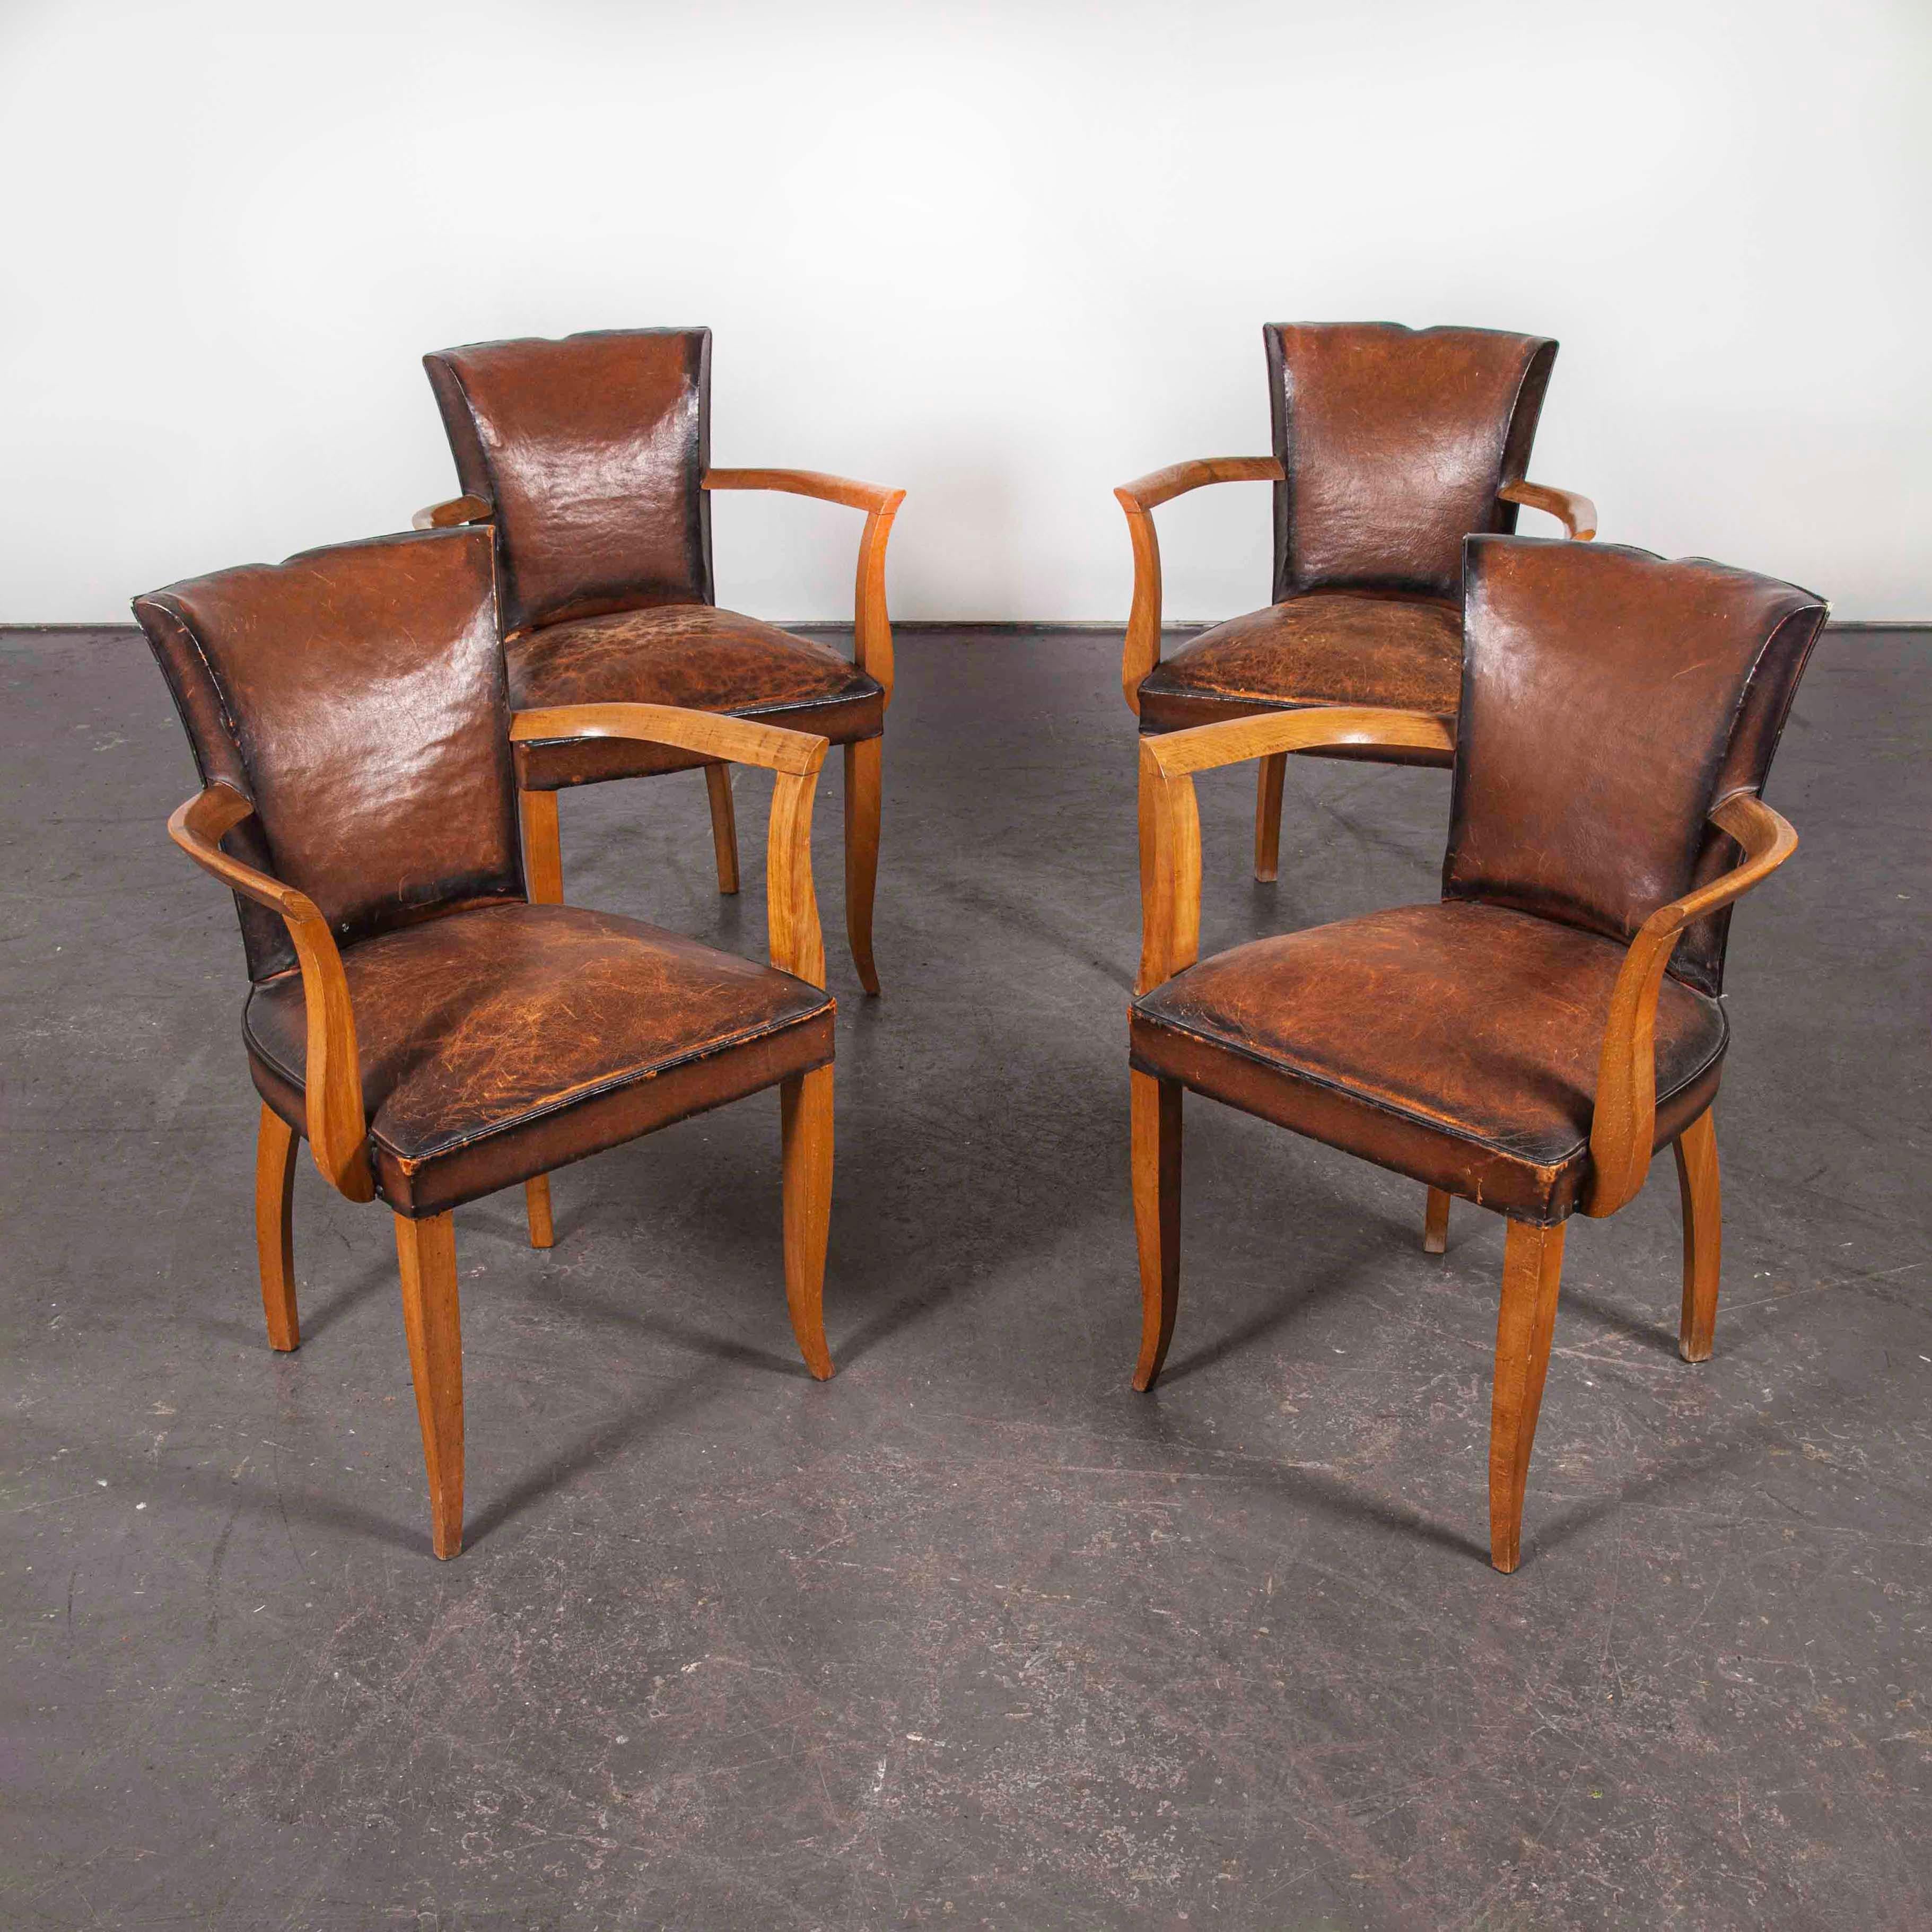 chairs from 1930s